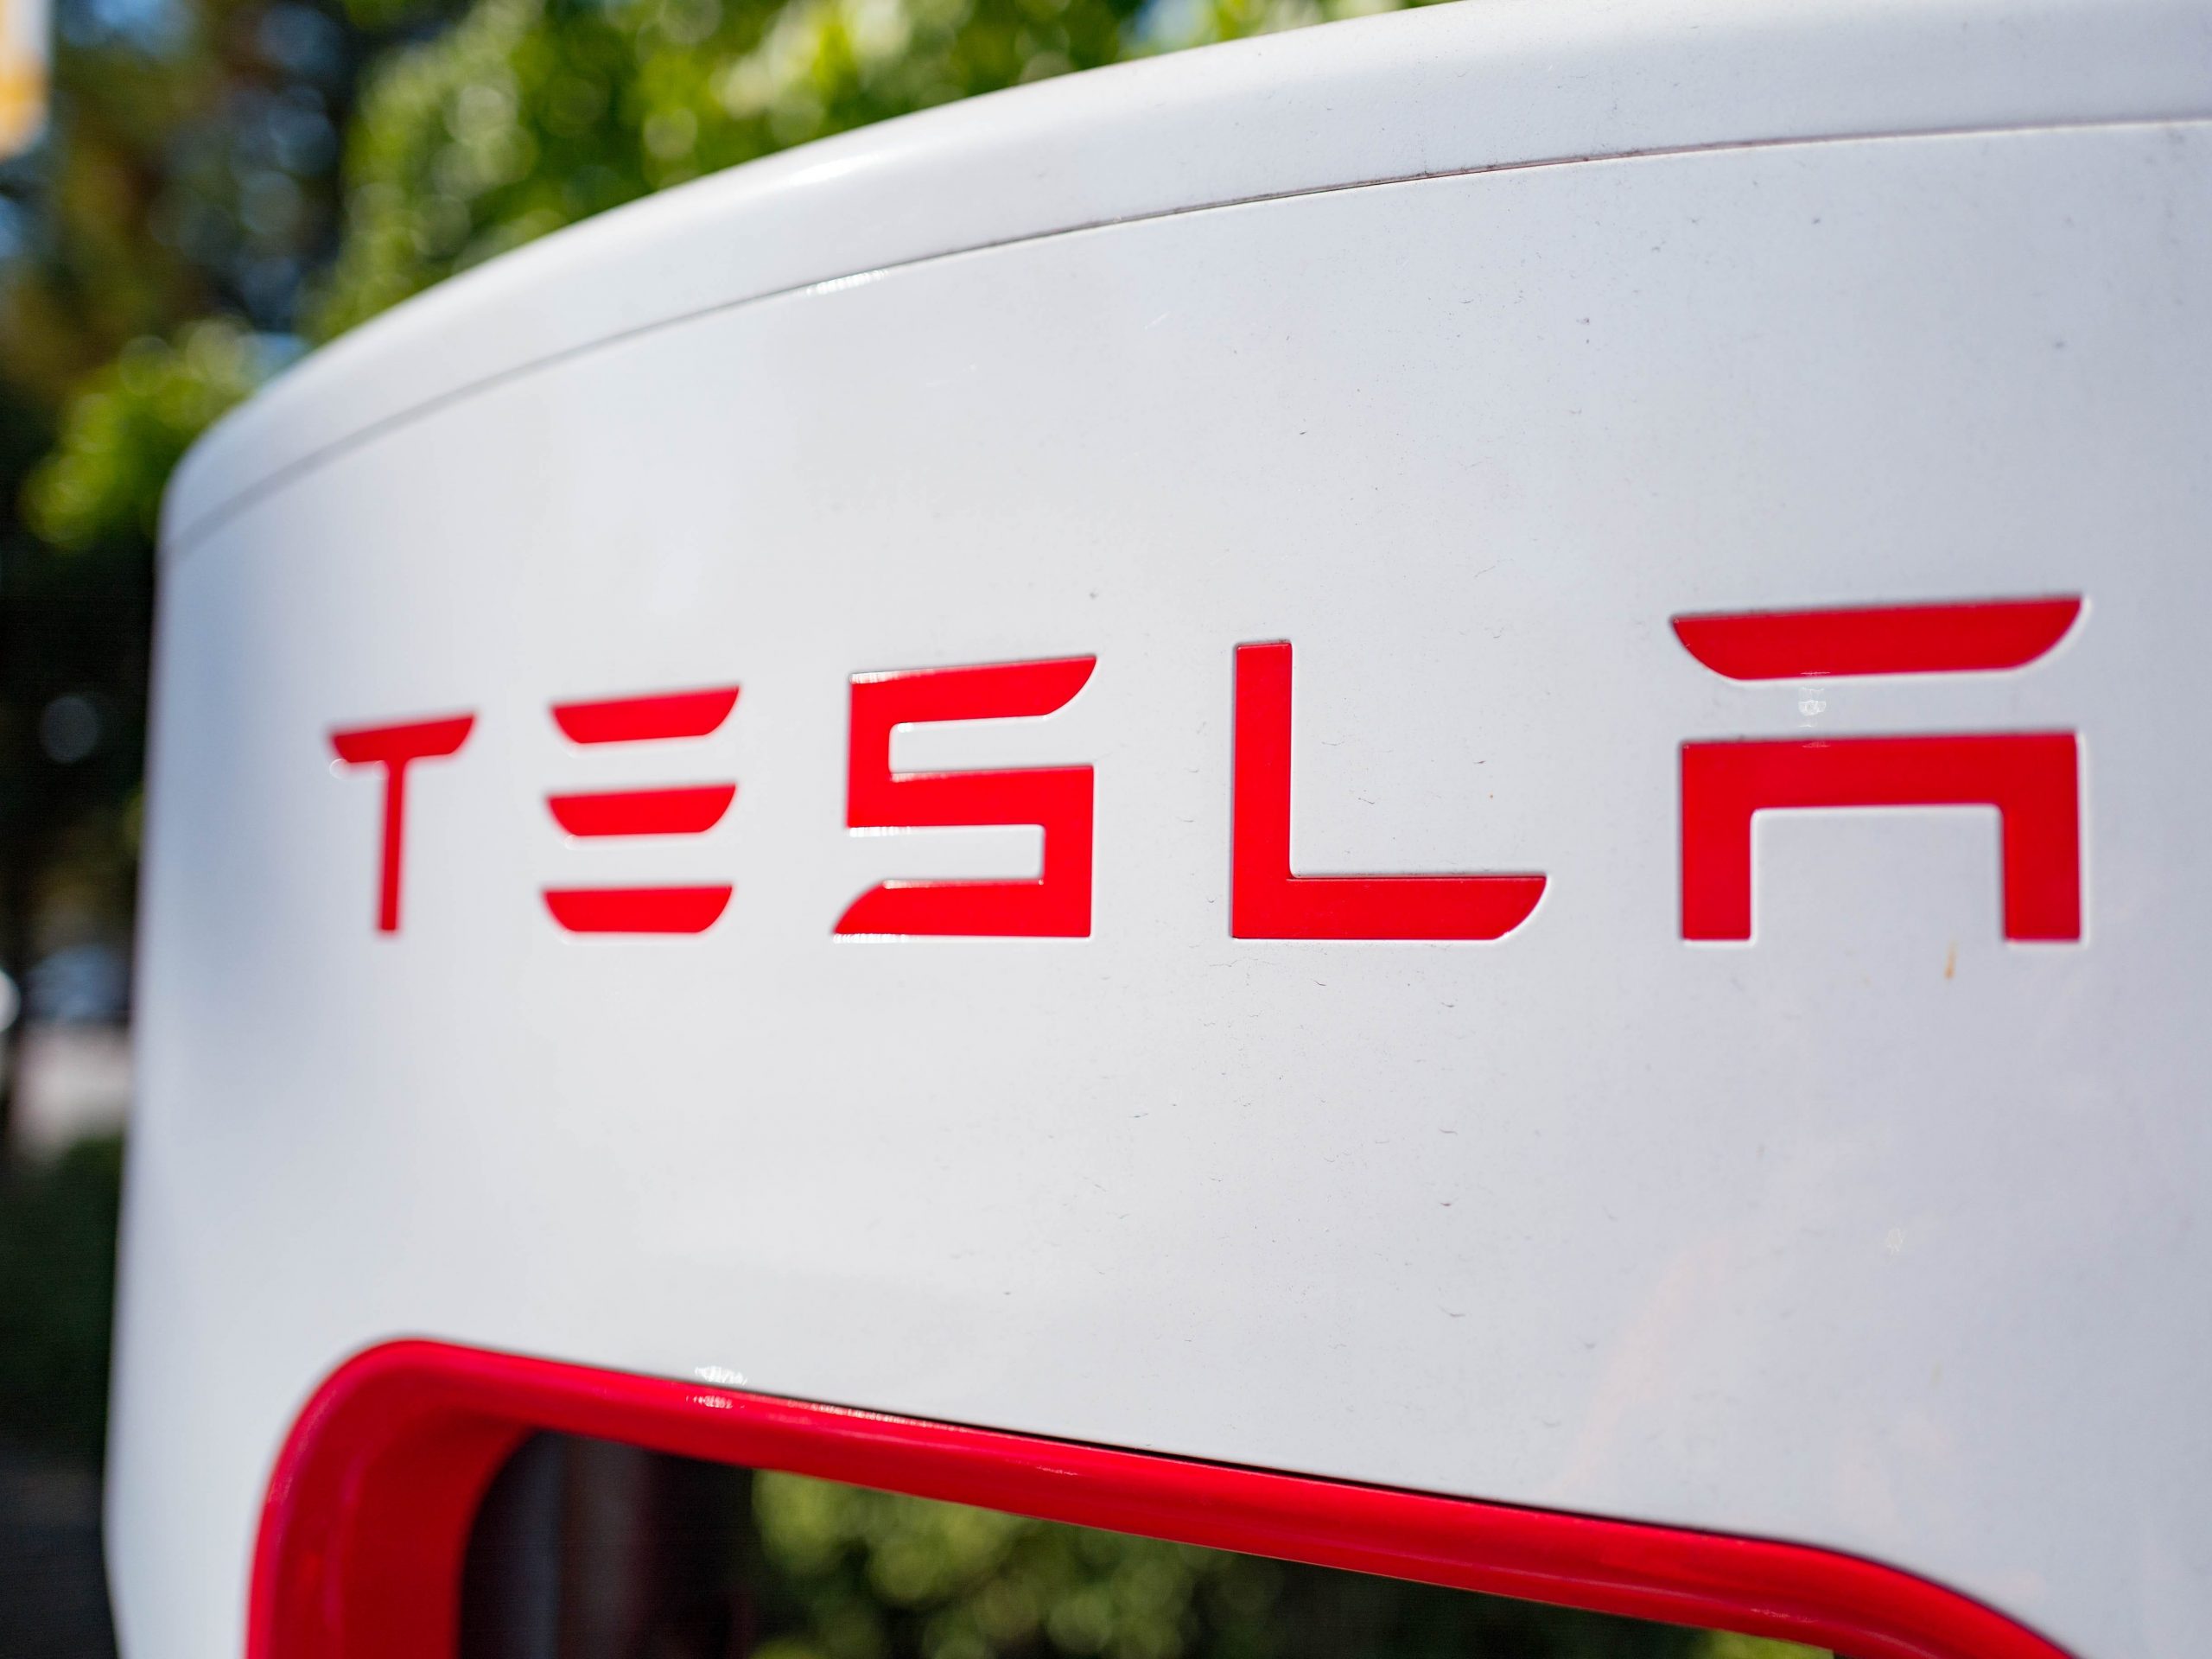 A close-up red Tesla logo on a white background.